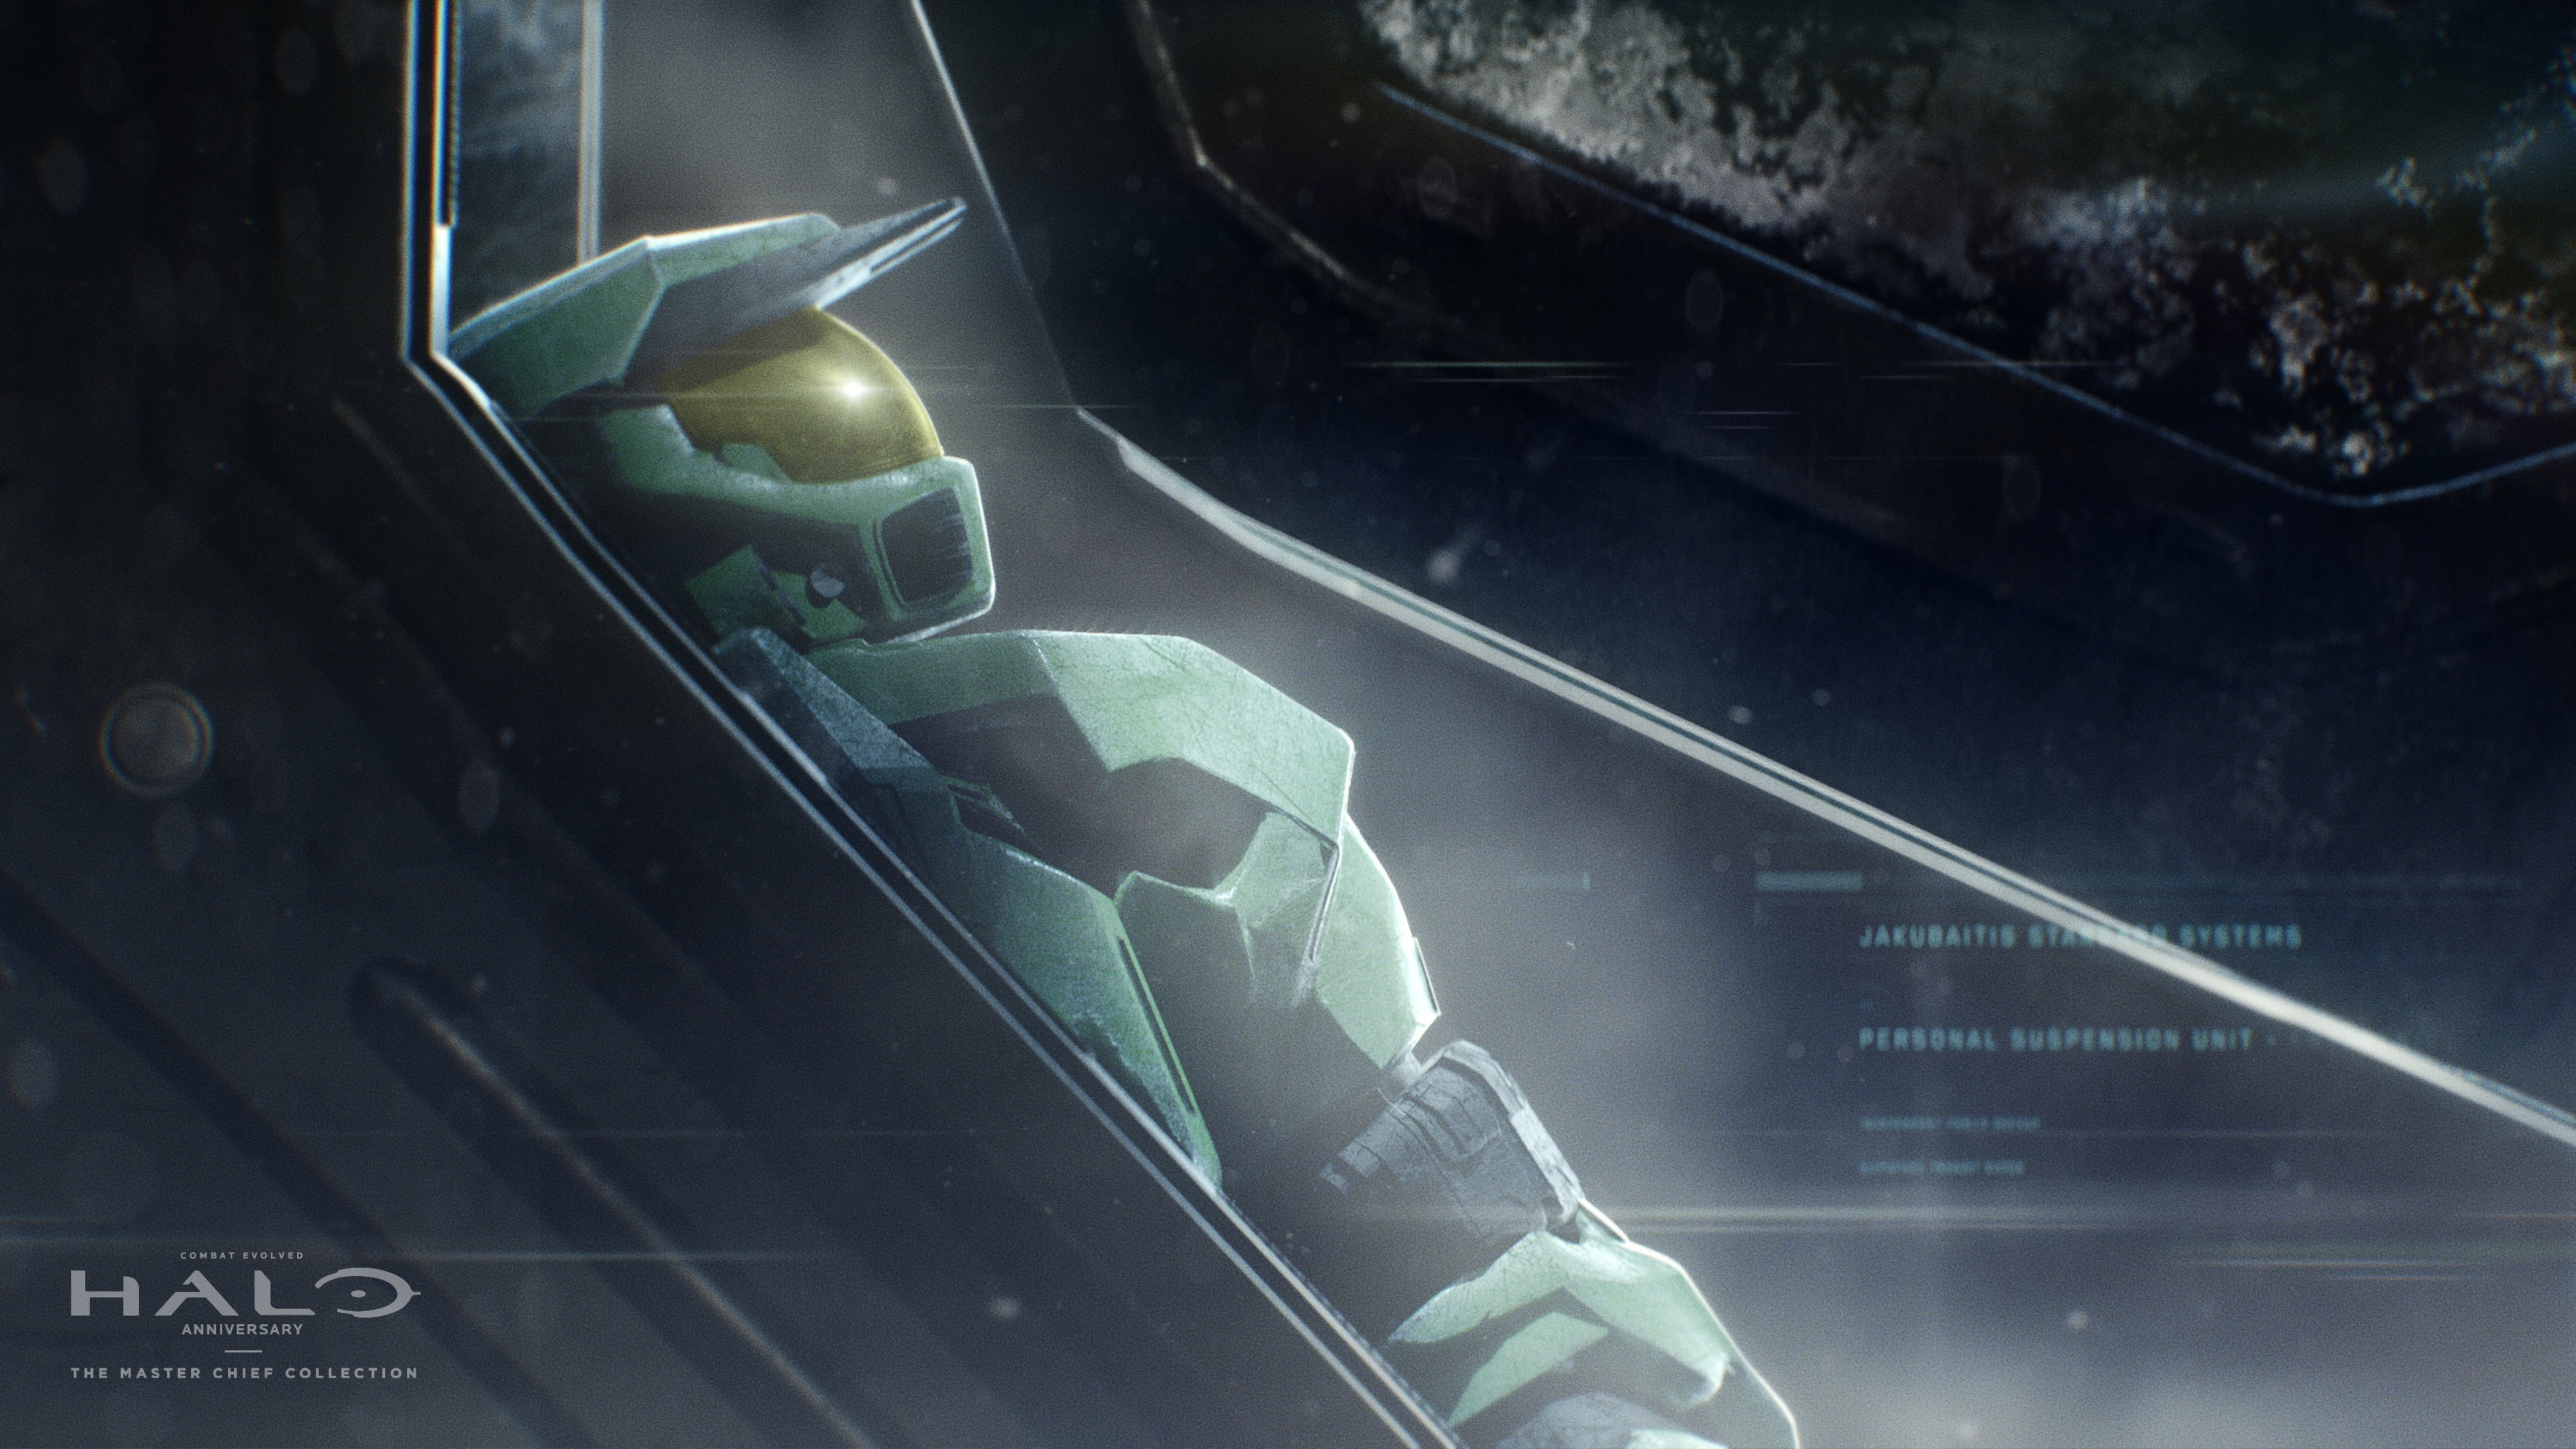 Halo Halo The Master Chief Collection Wallpaper:3840x2160